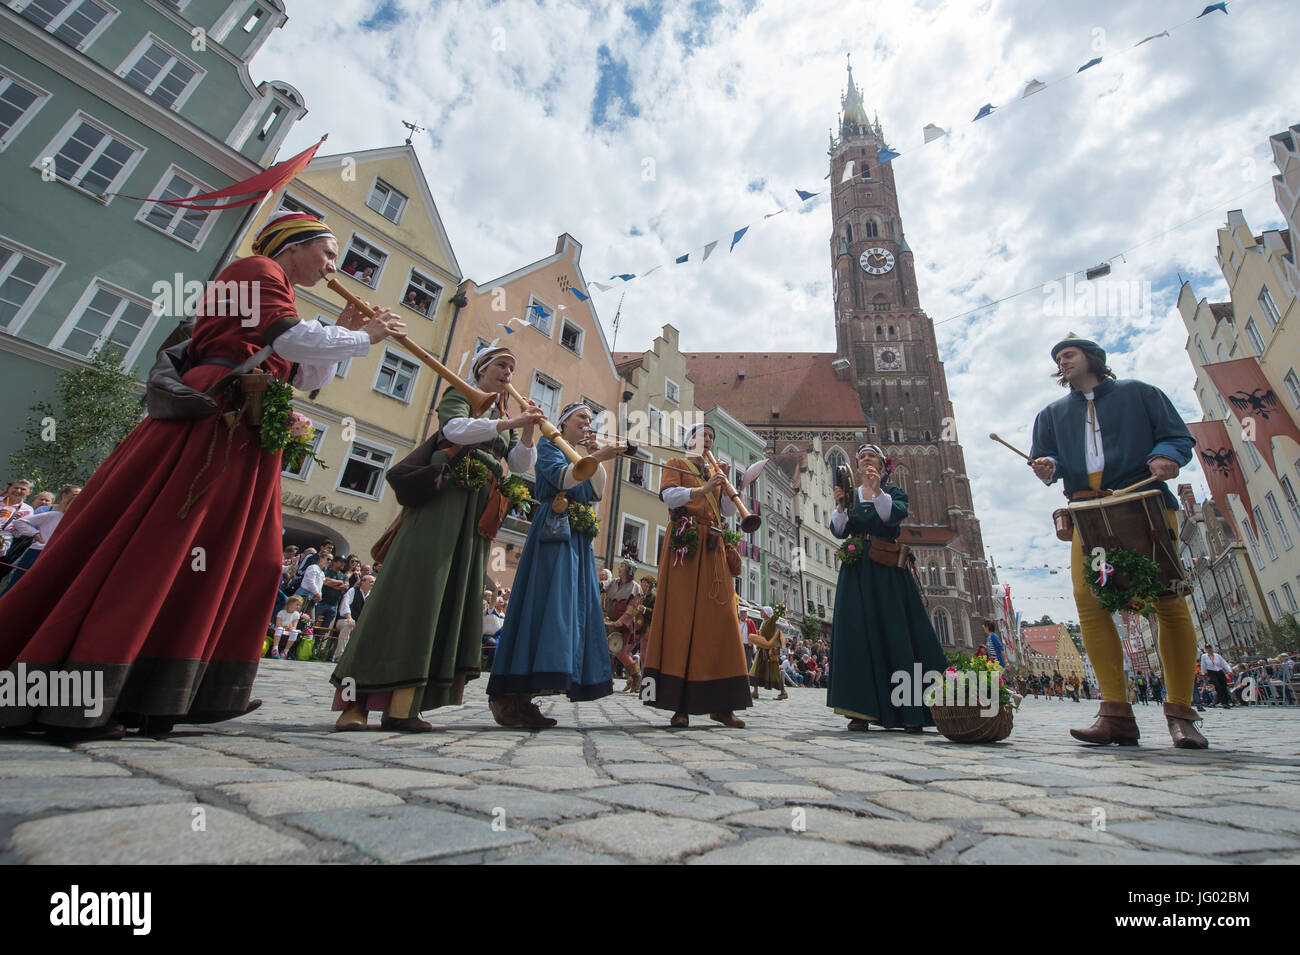 Landshut, Germany. 2nd July, 2017. Musicians in costumes perform at the parade of the Landshut Wedding (German: 'Landshuter Hochzeit') in the old town of Landshut, Germany, 2 July 2017. The citizens of the Lower Bavarian regional capital reenact the wedding ceremony of the the son of the Duke of Bavaria, George, and the Polish King's daughter Hedwig in 1475. Photo: Armin Weigel/dpa/Alamy Live News Stock Photo